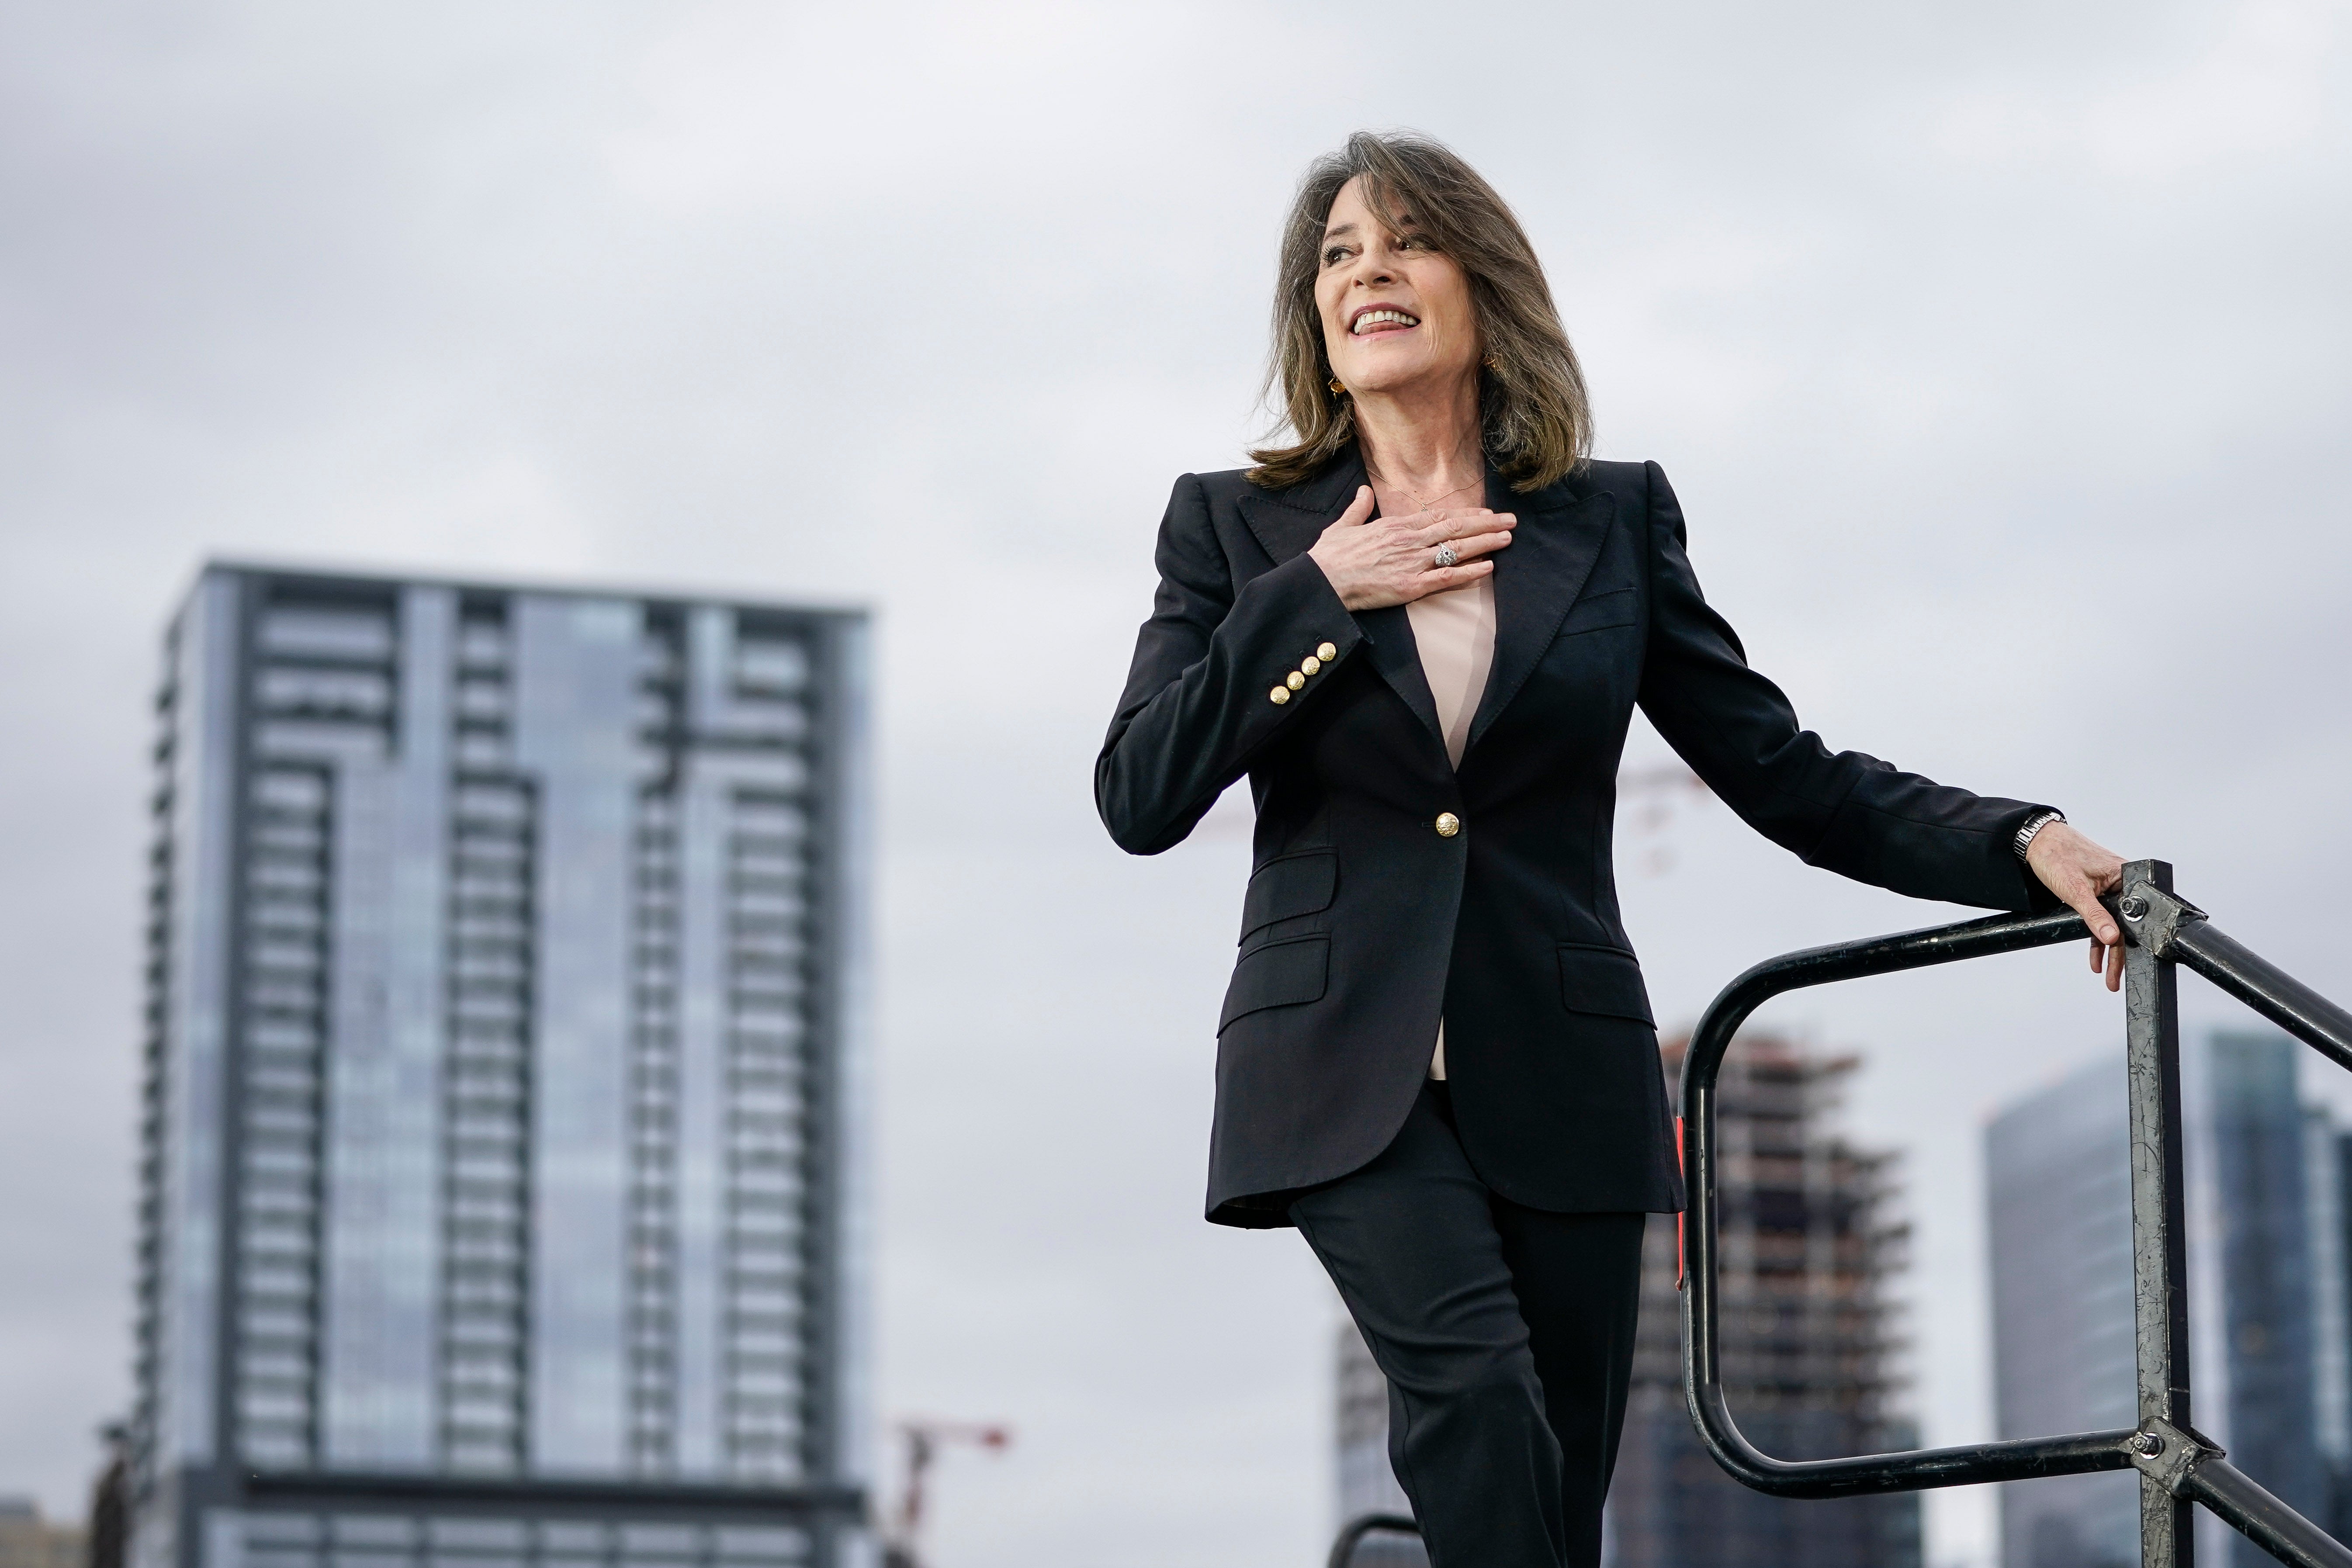 Marianne Williamson is increasingly convinced that the old order is failing